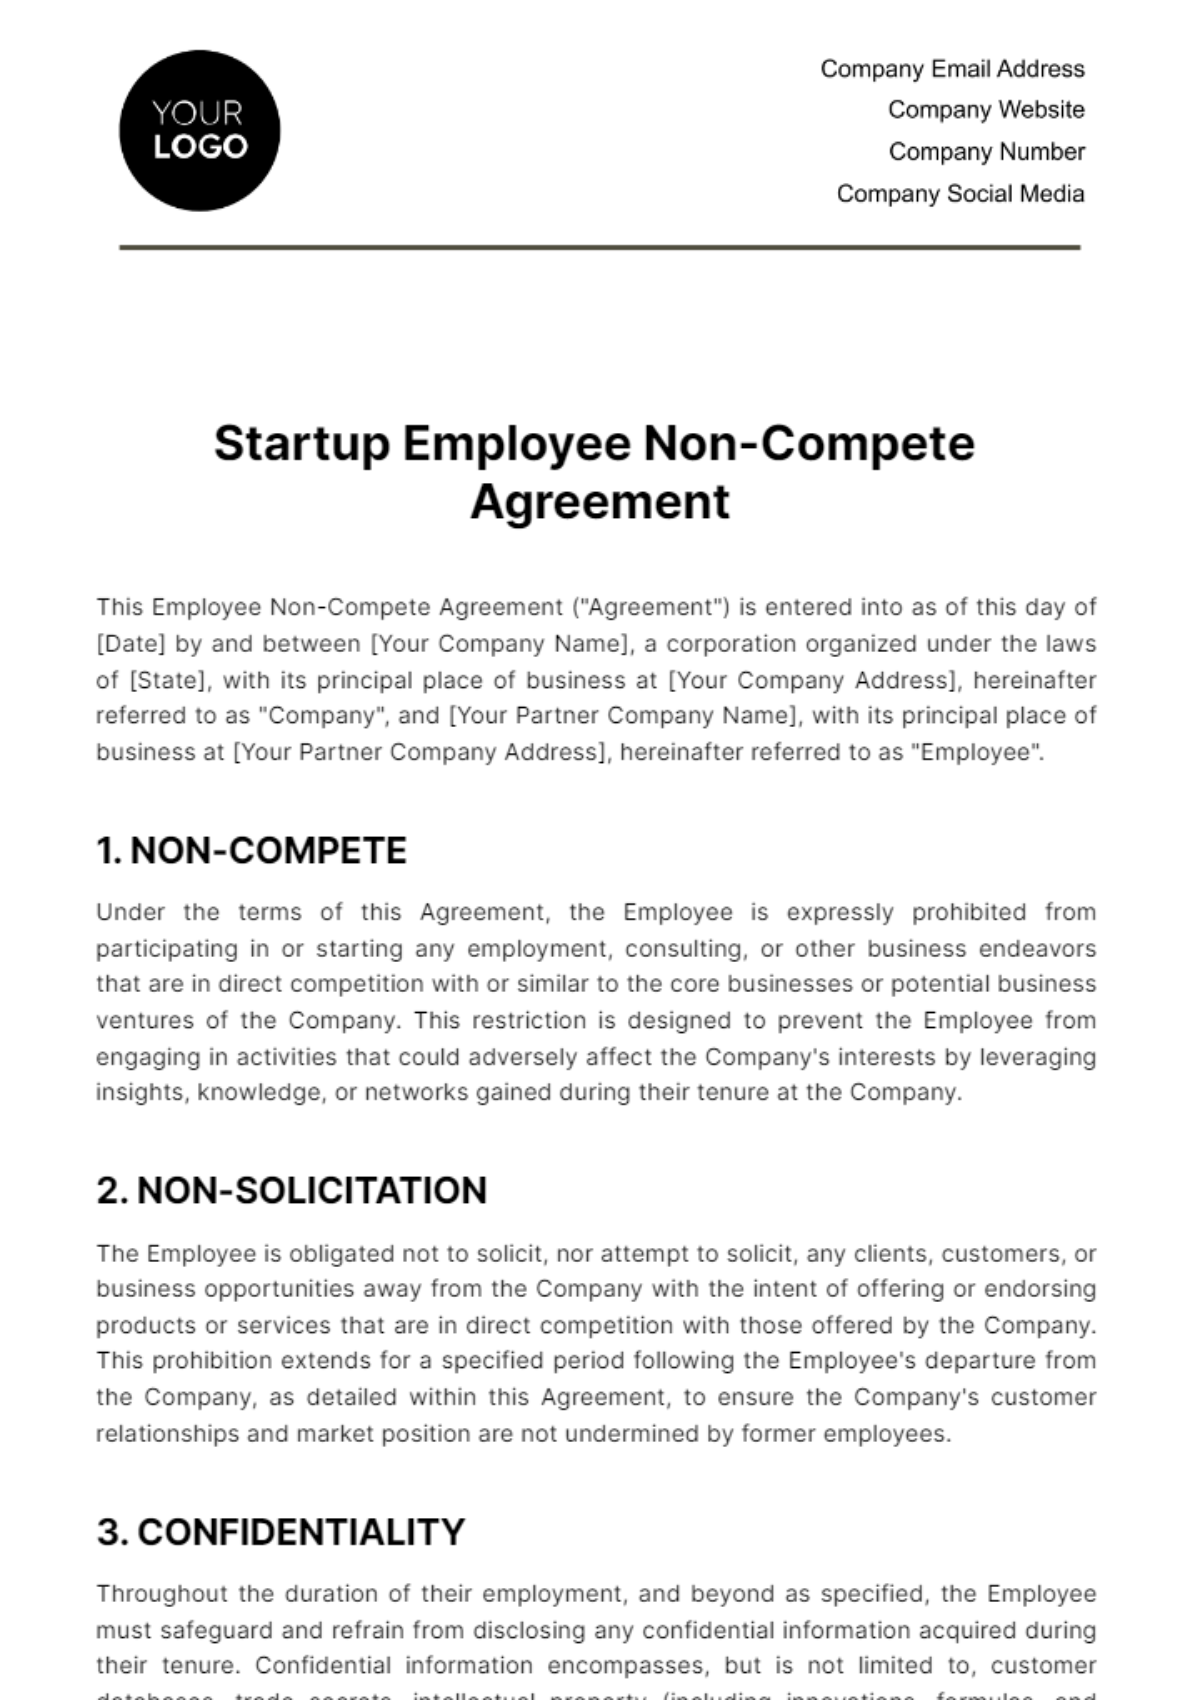 Startup Employee Non-Compete Agreement Template